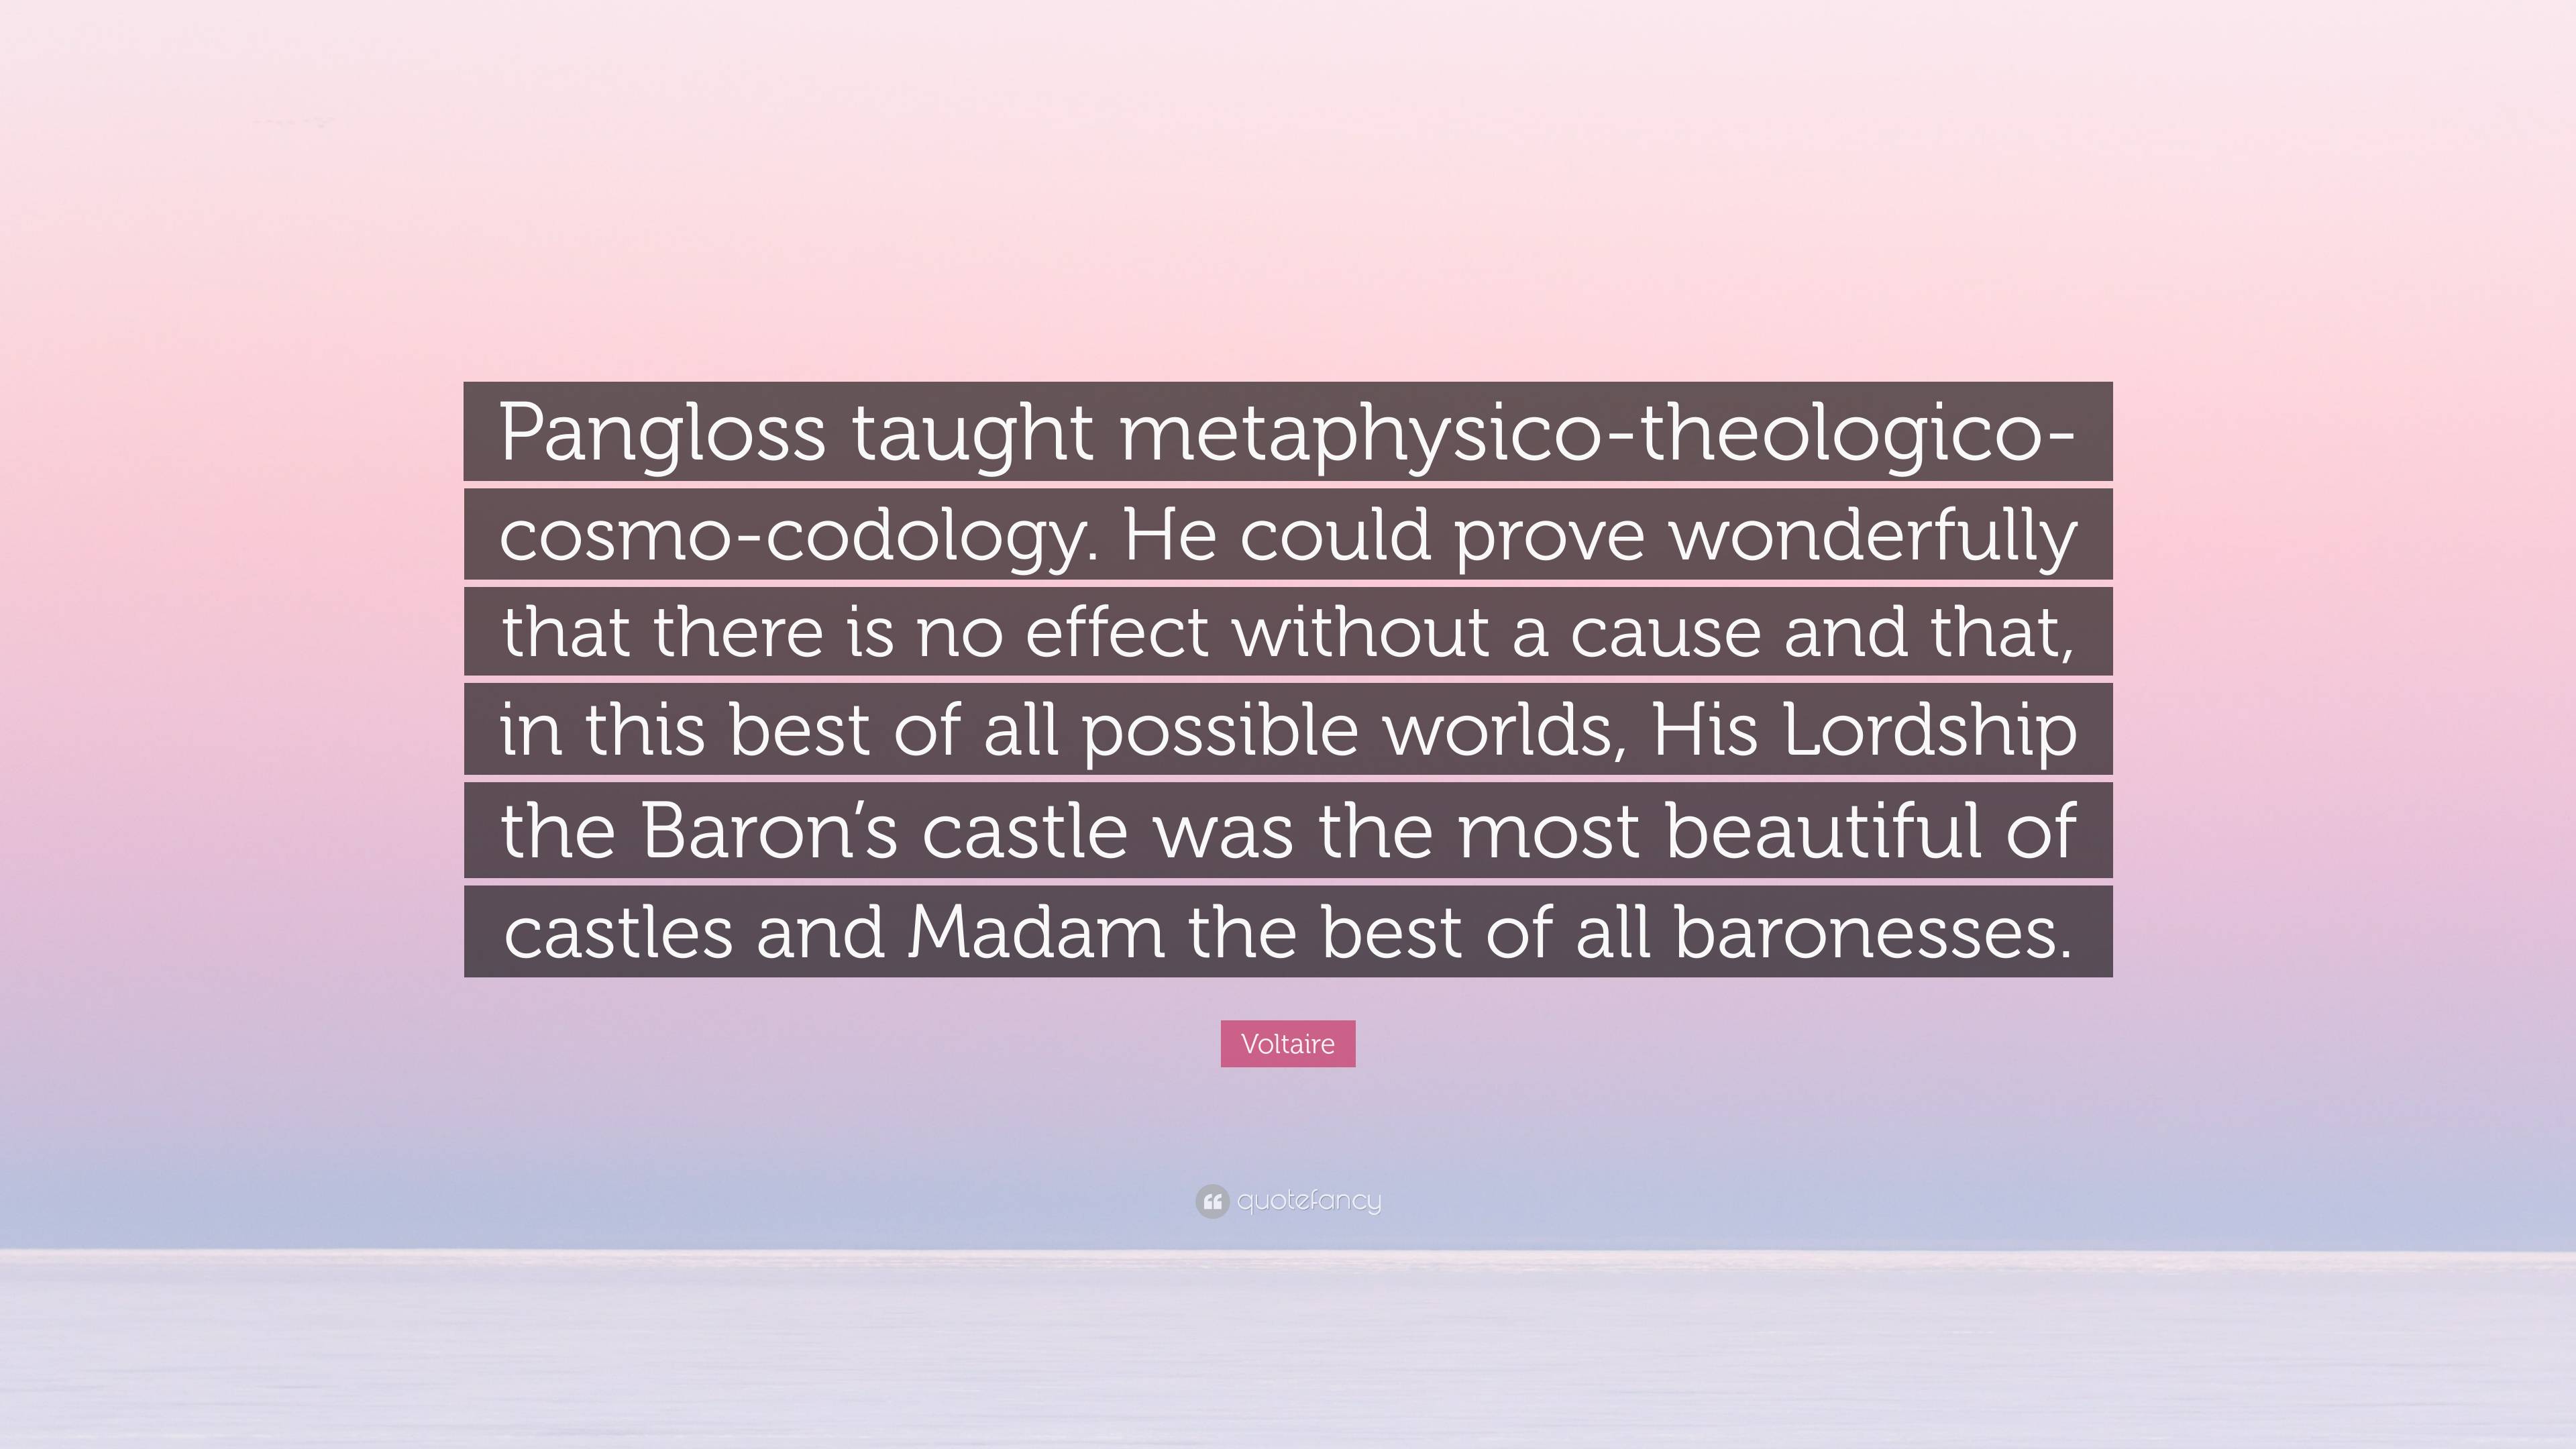 Voltaire Quote: “Pangloss taught metaphysico-theologico-cosmo-codology ...